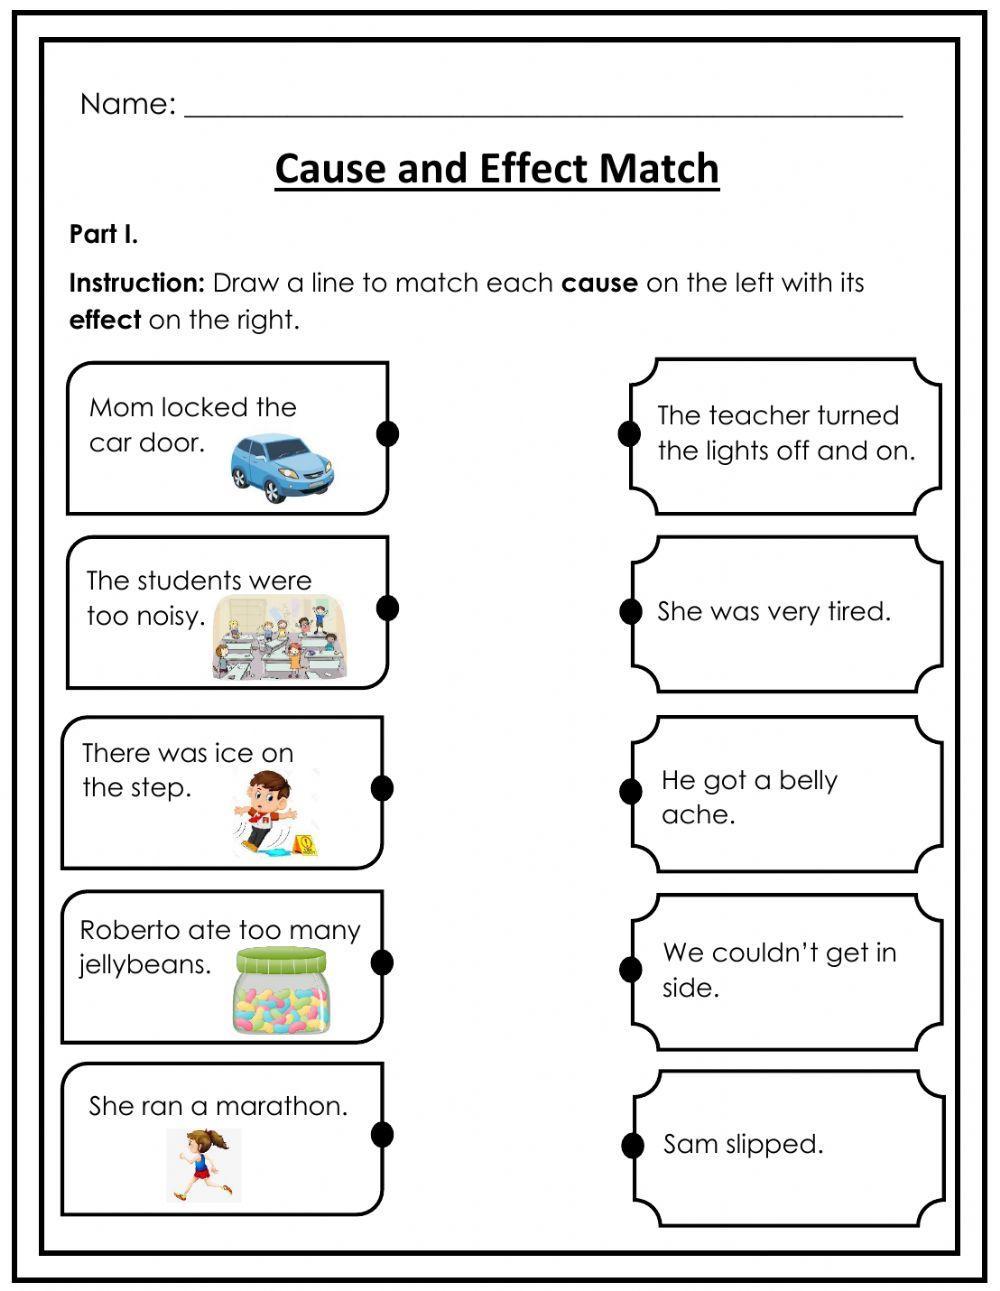 Cause and Effect Match